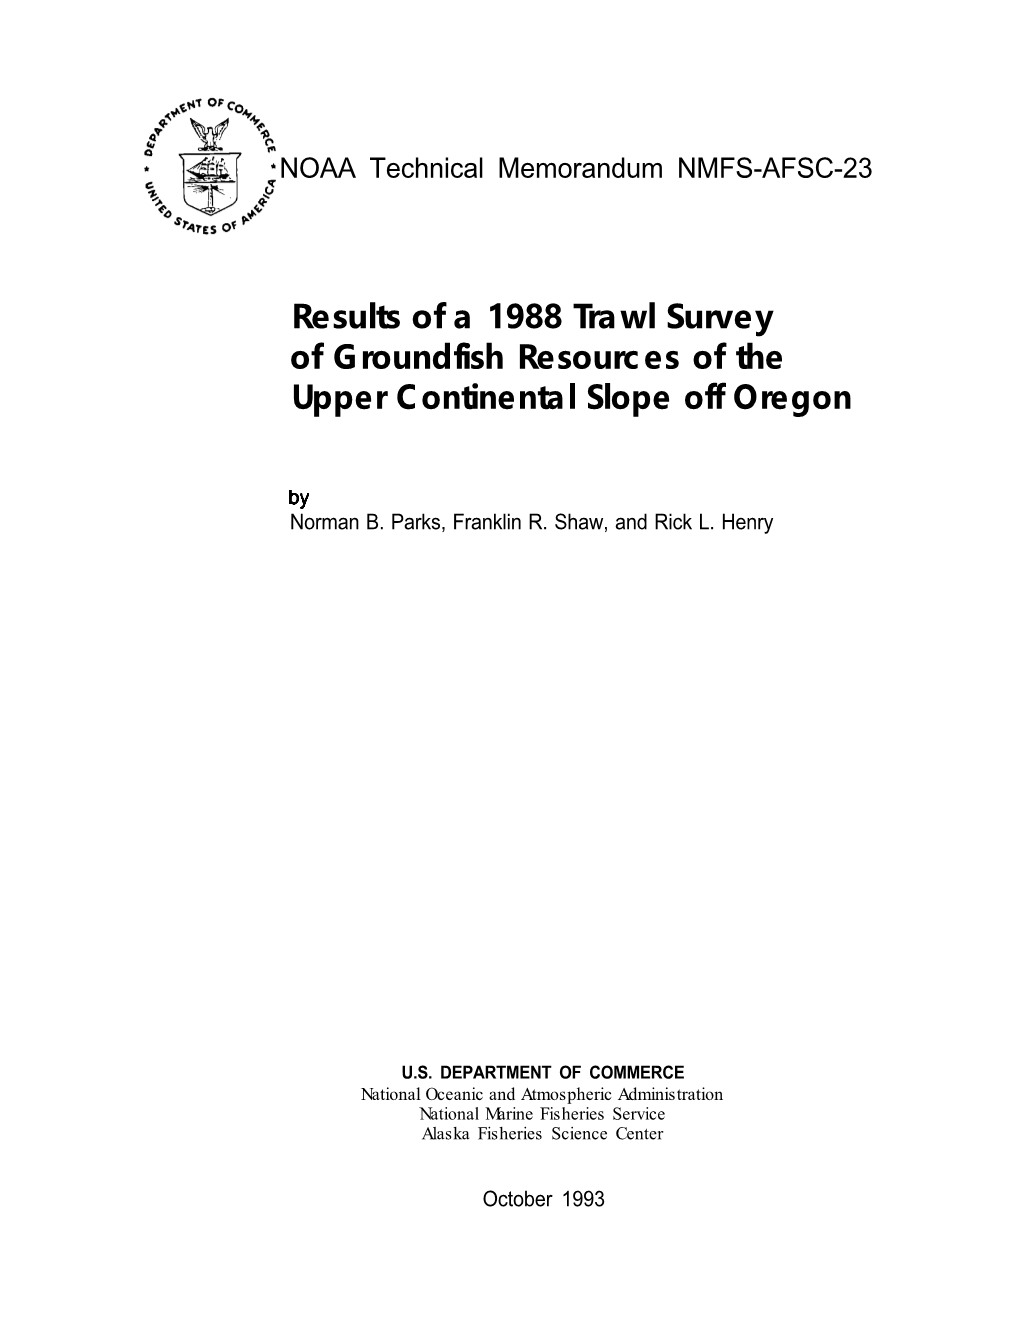 Results of a 1988 Trawl Survey of Groundfish Resources of the Upper Continental Slope Off Oregon